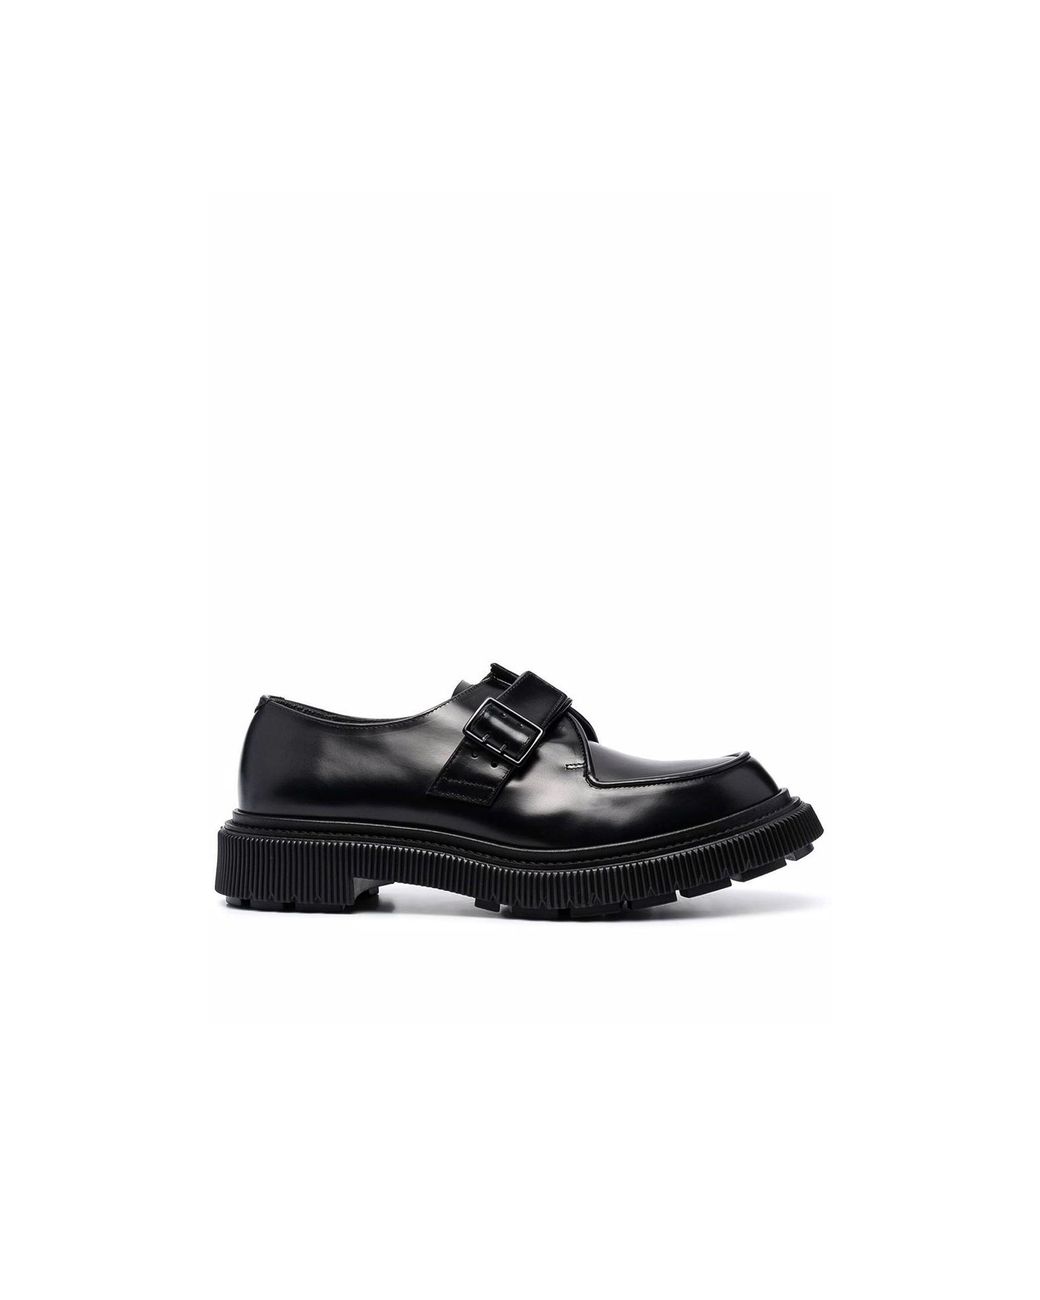 Adieu Type 136 Buckle Derby Shoes - Men's - Calf Leather/rubber in ...